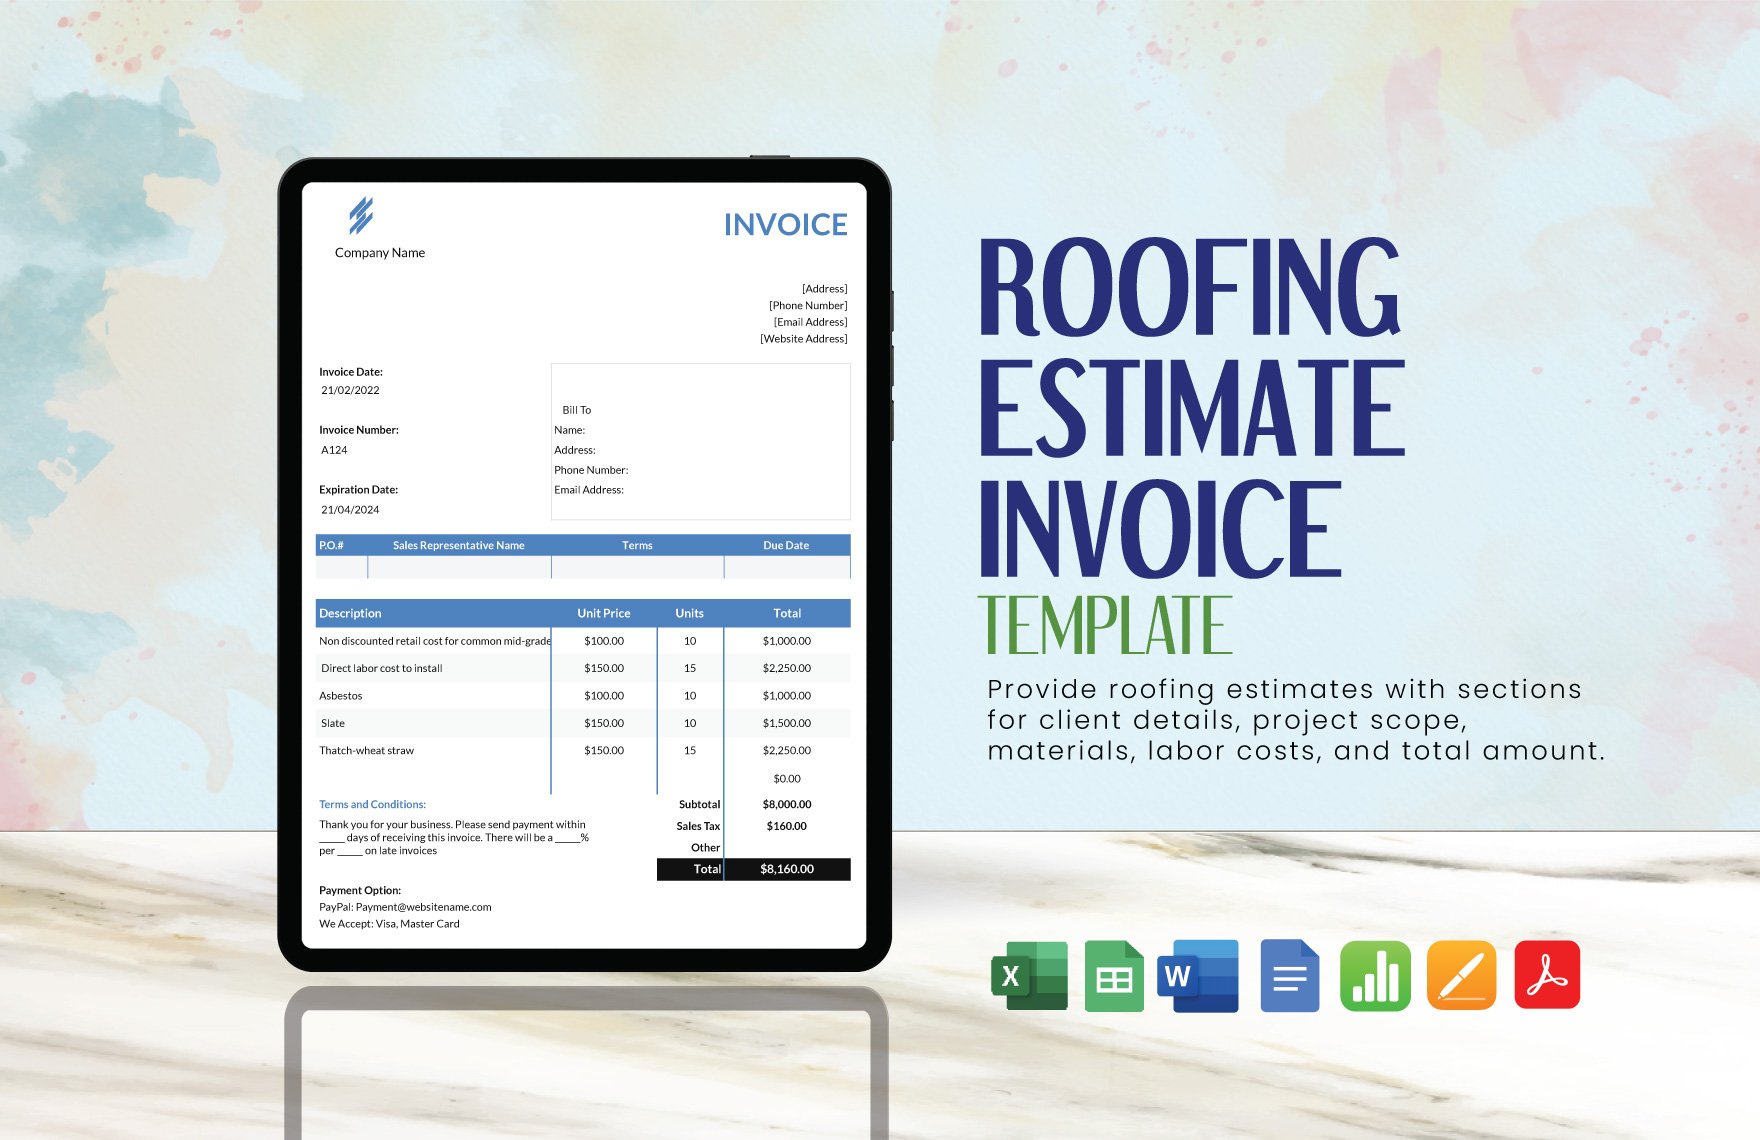 Roofing Estimate Invoice Template in Word, Google Docs, Excel, PDF, Google Sheets, Apple Pages, Apple Numbers